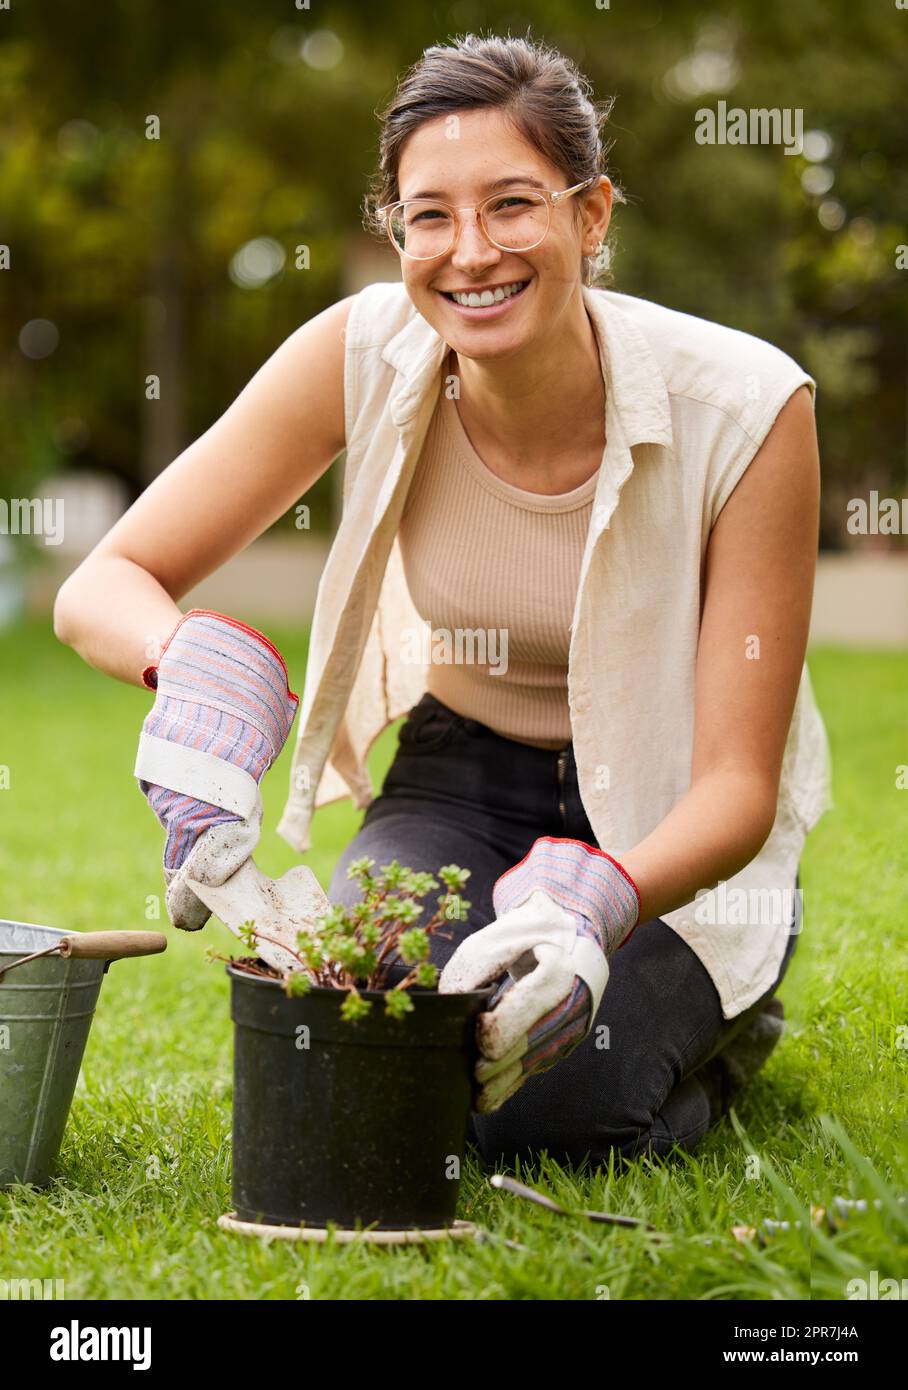 A smile for sustenance. Portrait of a smiling woman kneeling while doing some gardening in the backyard. Stock Photo